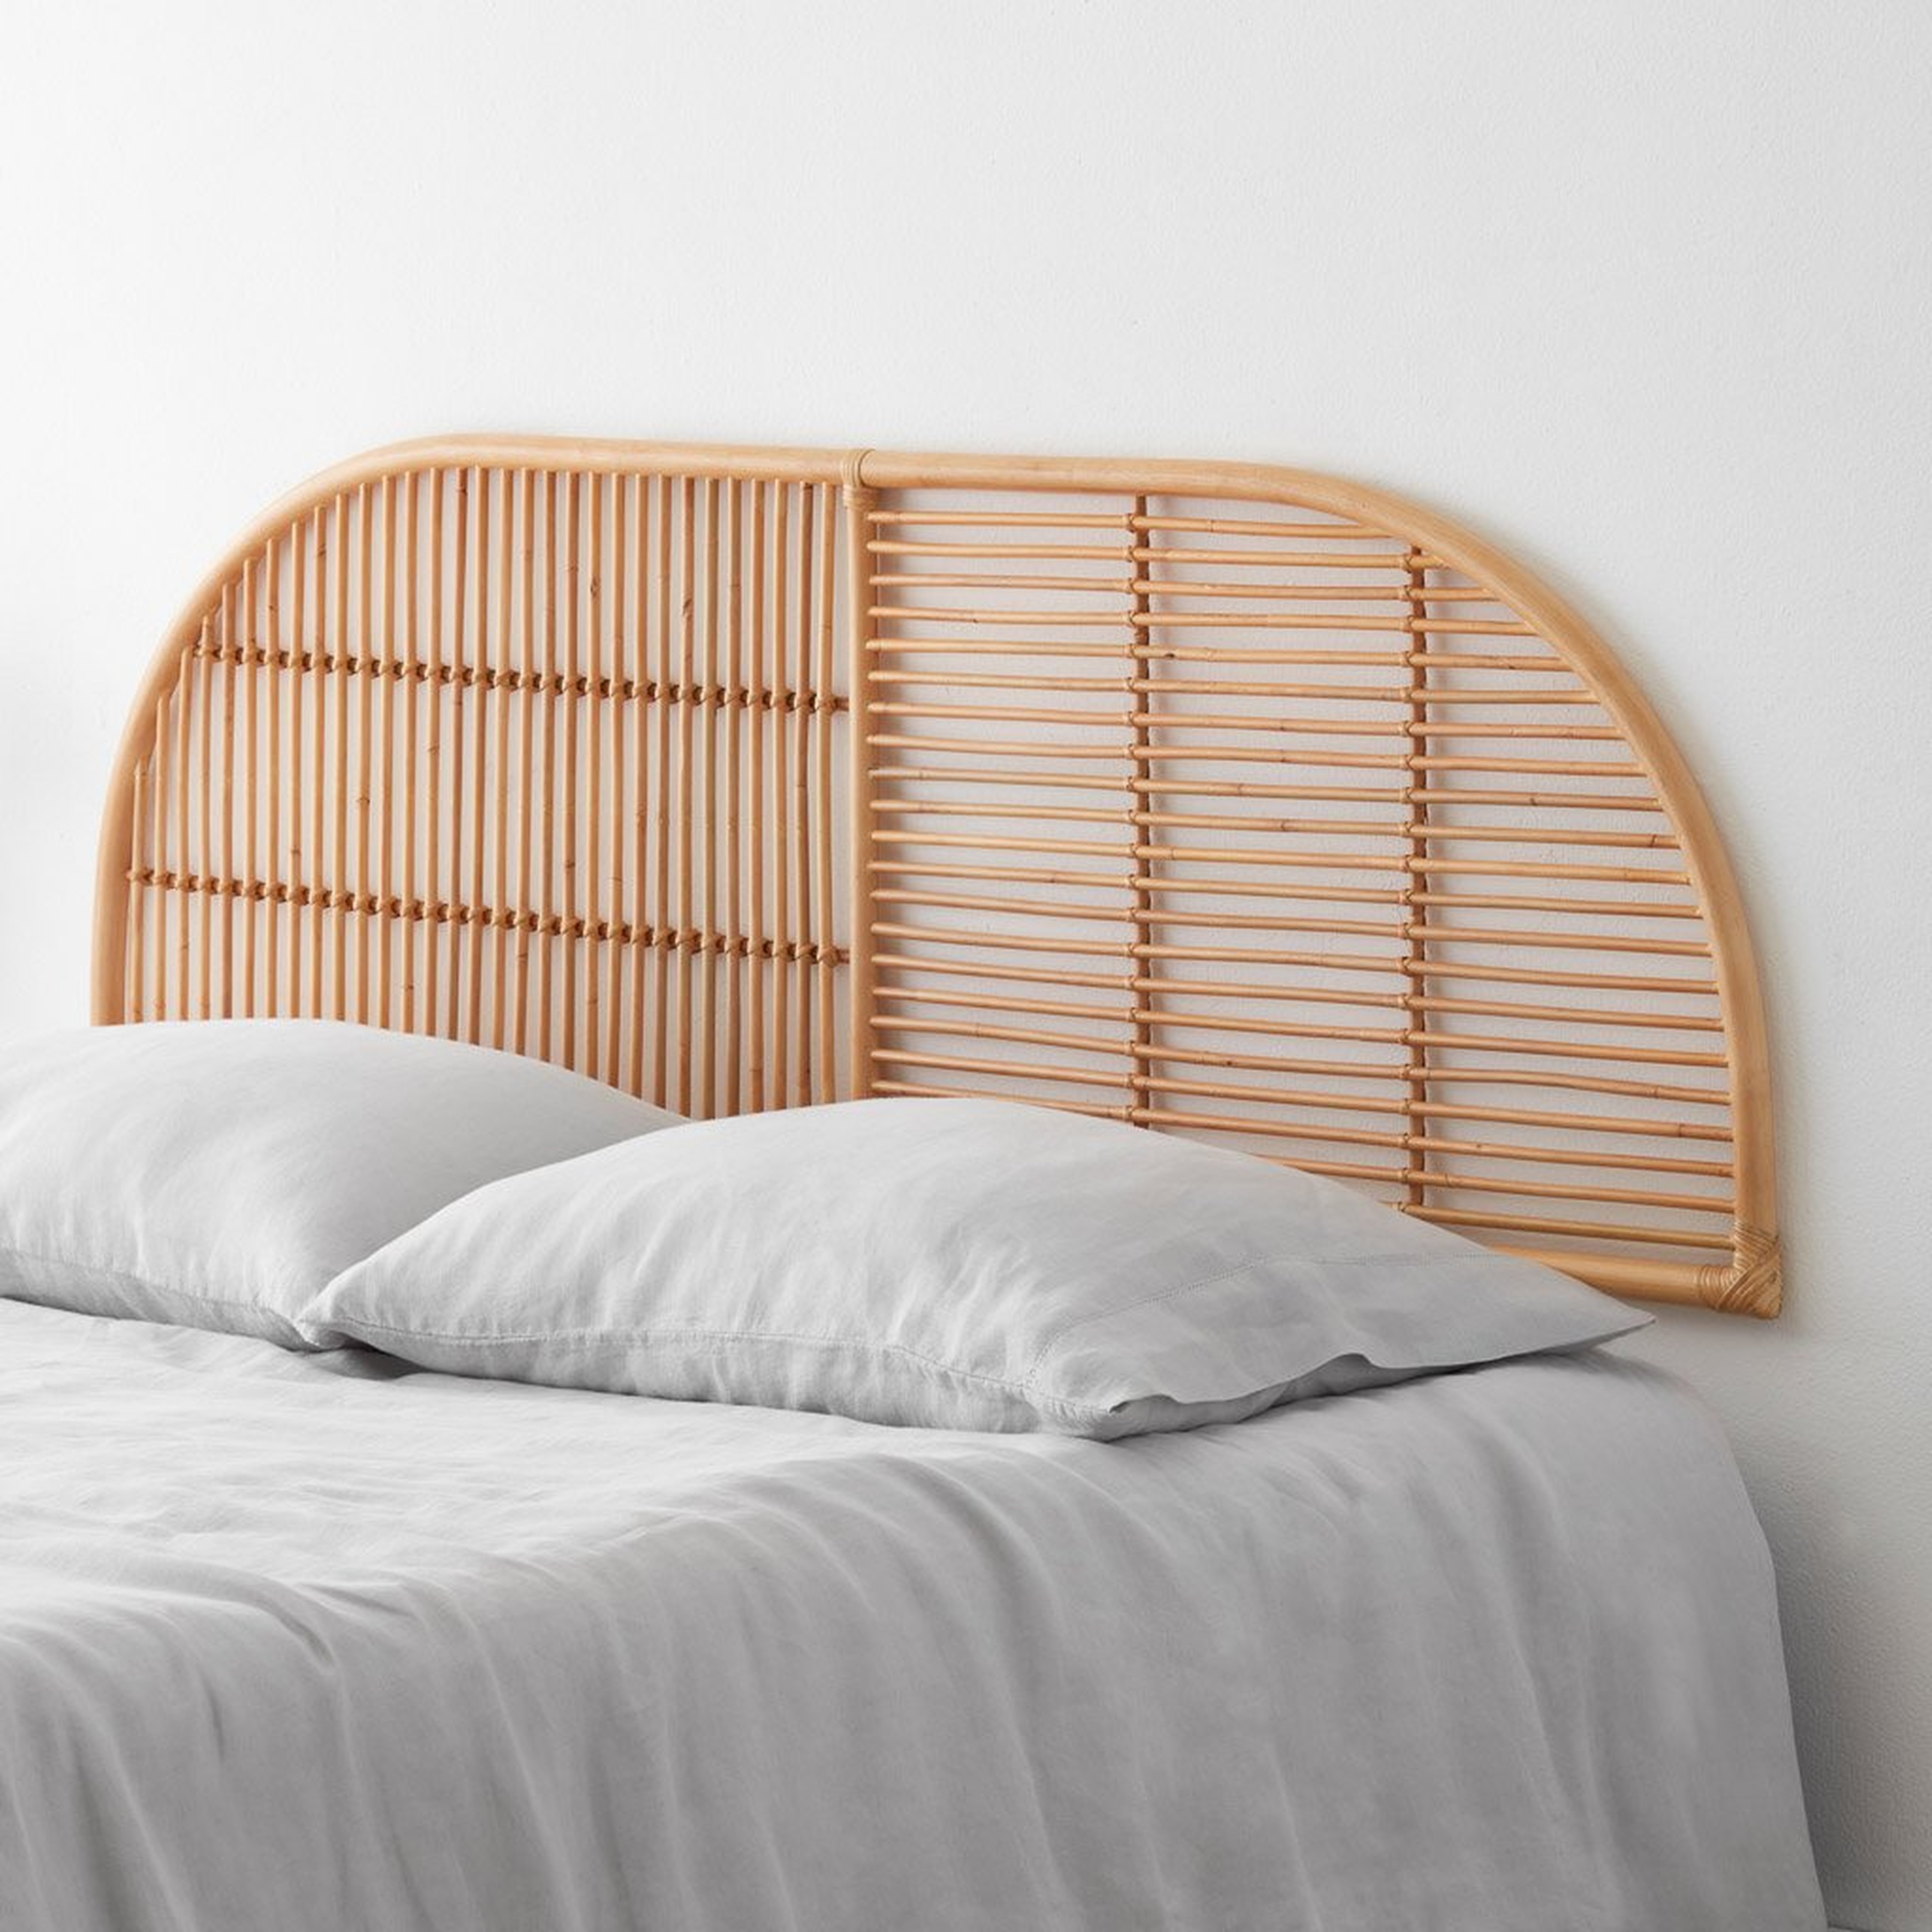 Java Rattan Headboard - Full/Queen By The Citizenry - The Citizenry